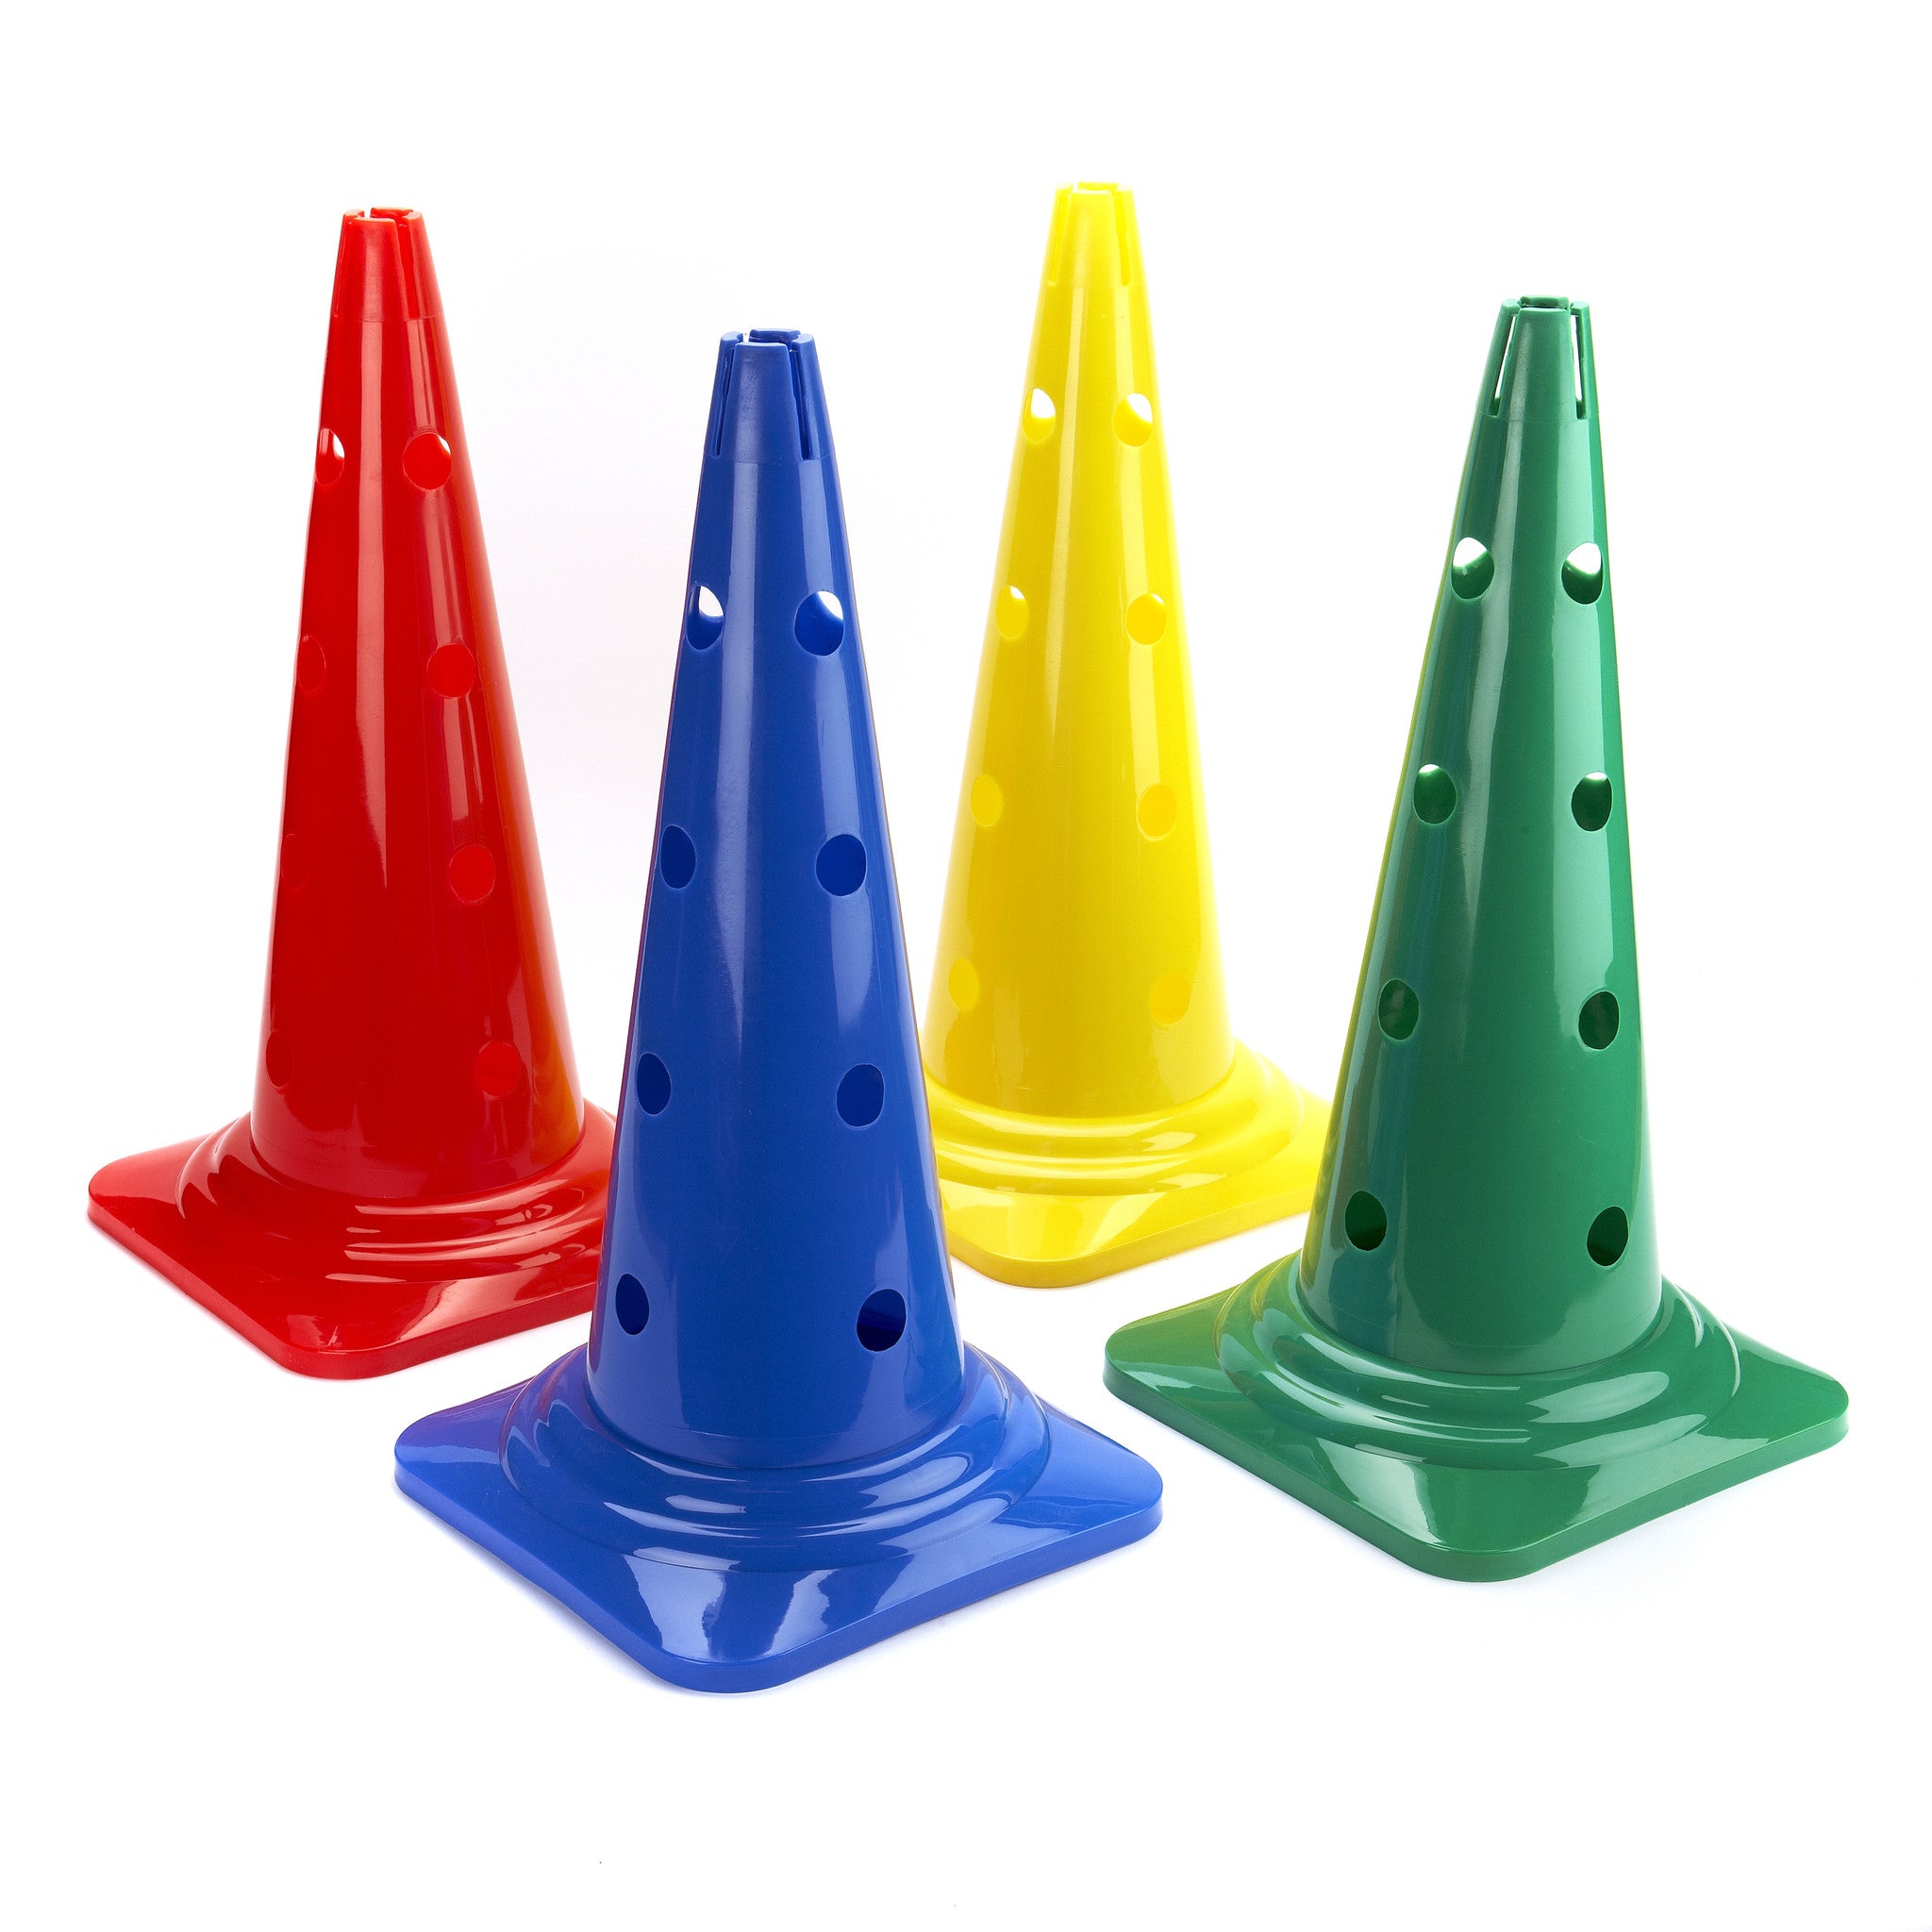 Sports marker cones with 3 vertical height positions for hurdles & top slot to support a vertical pole.